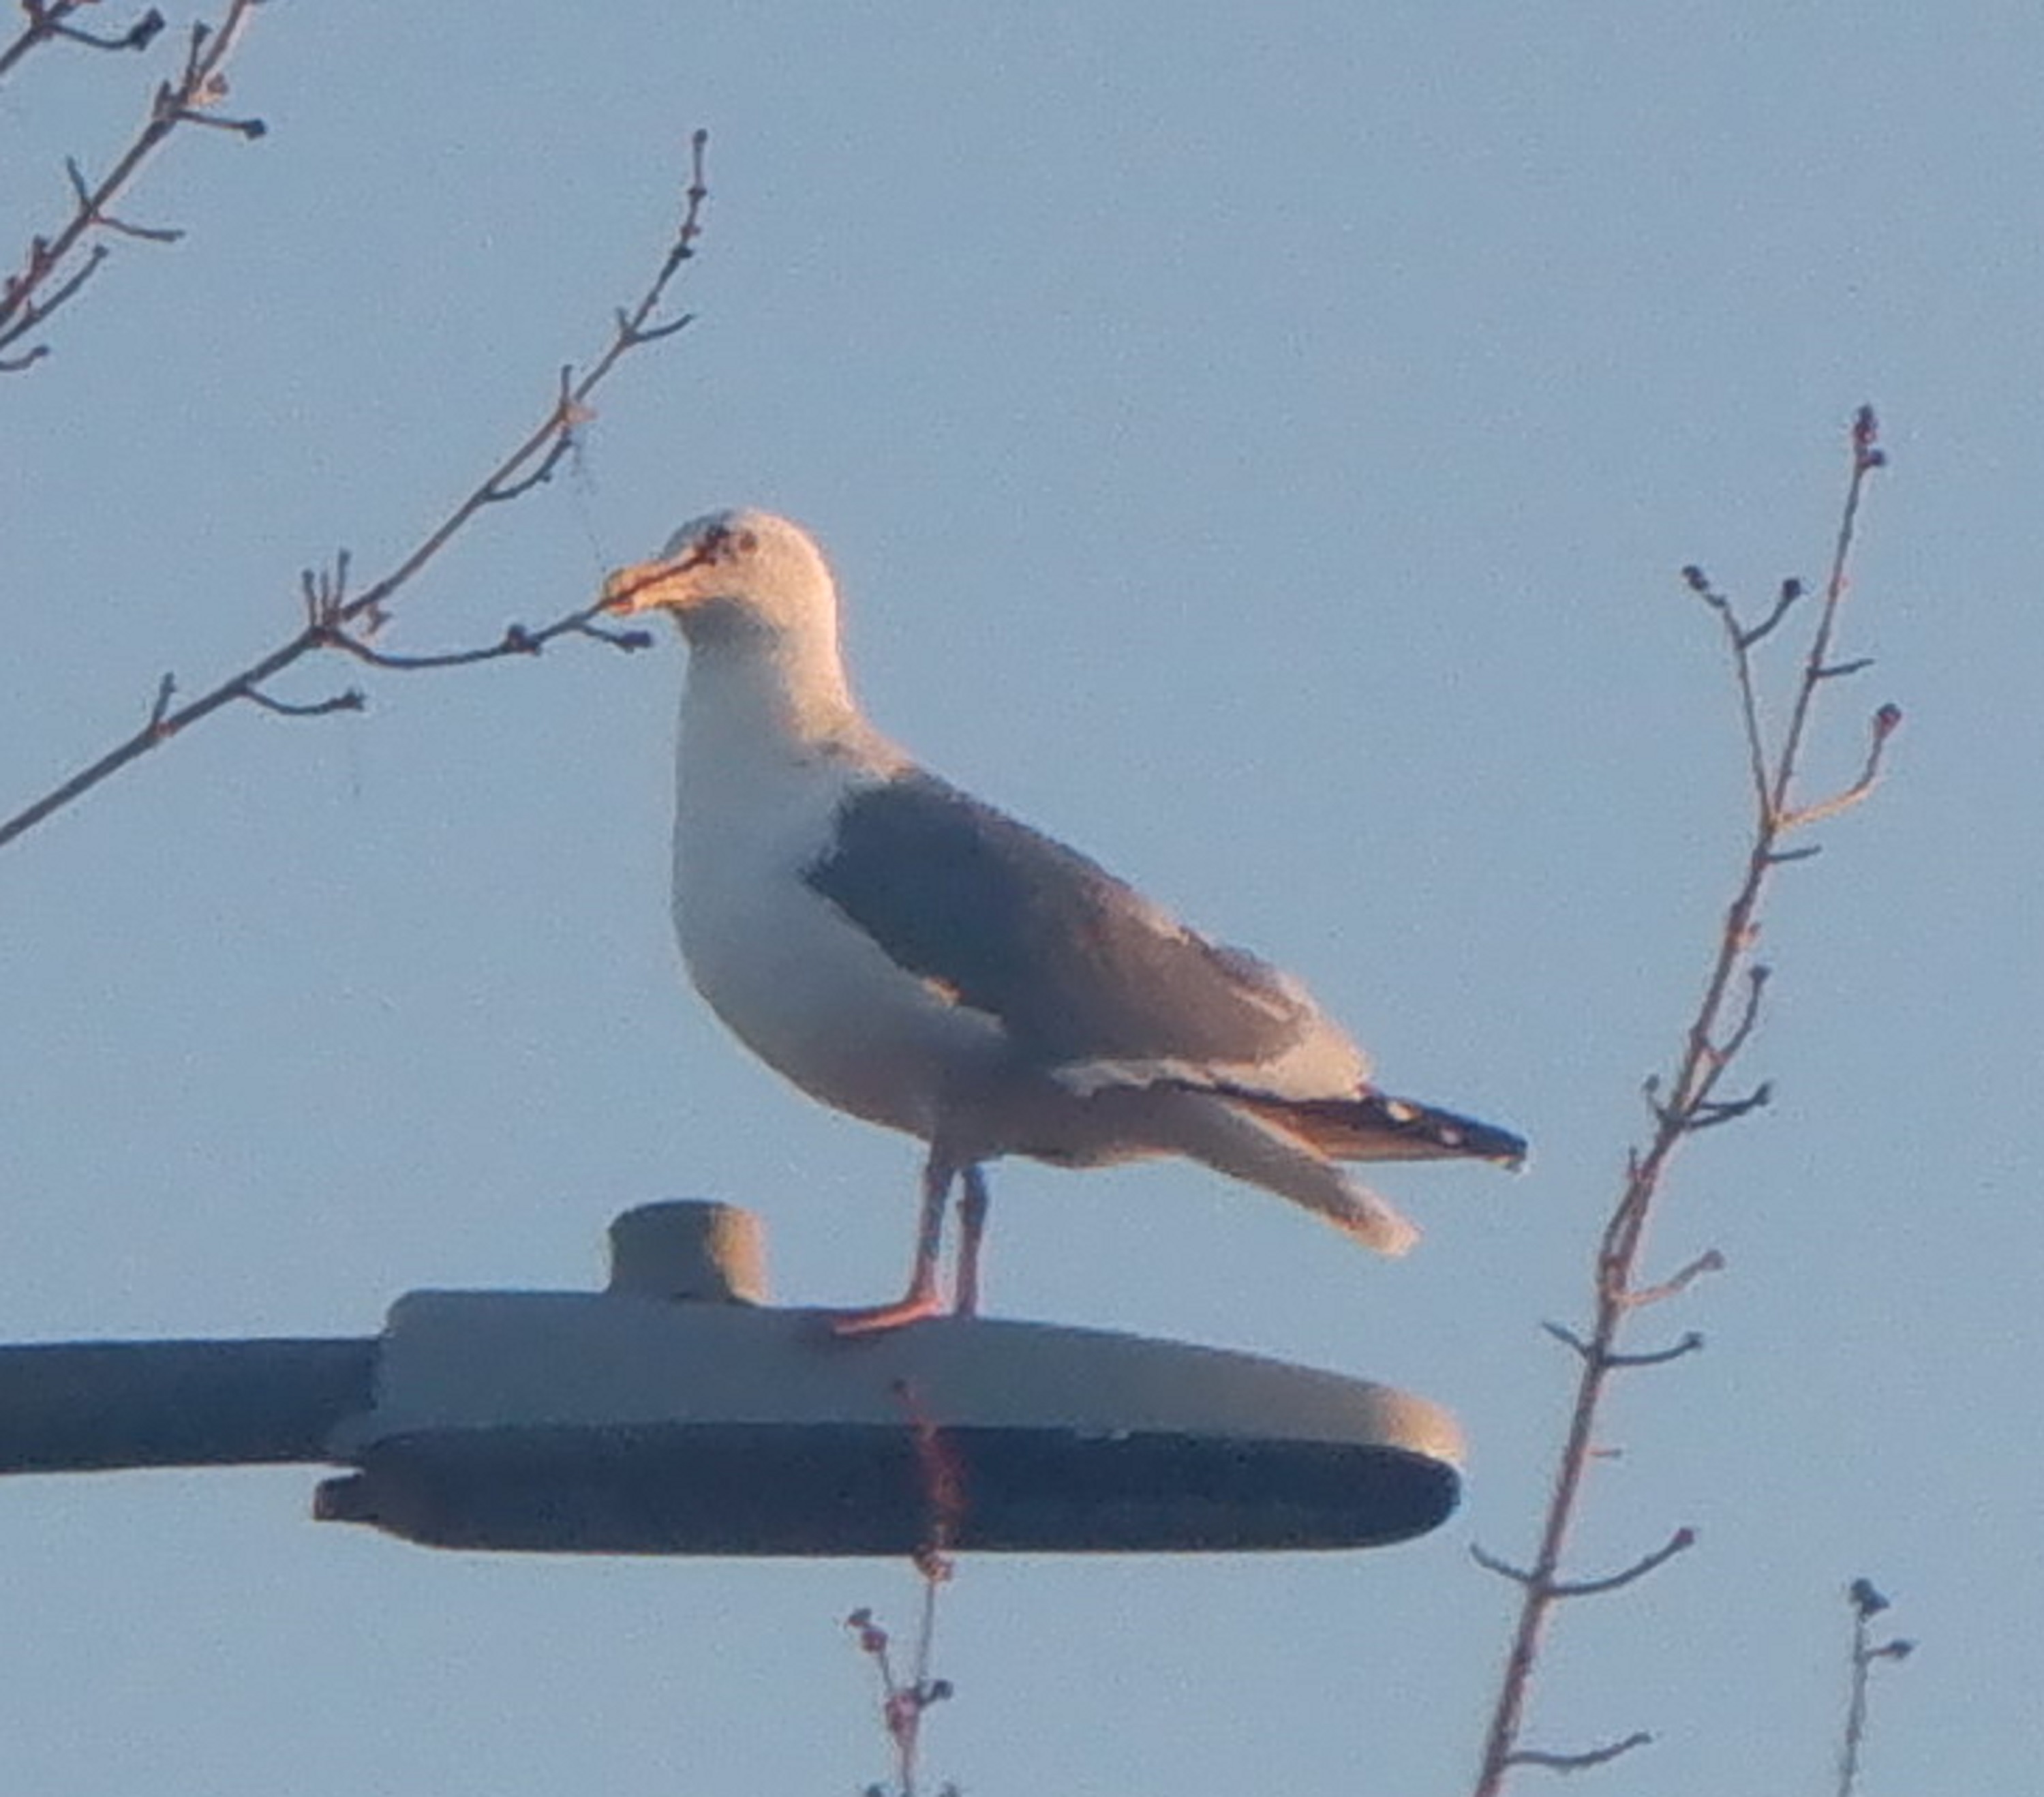 Photo I took of a seagull by the bus stop this morning 1-17-23